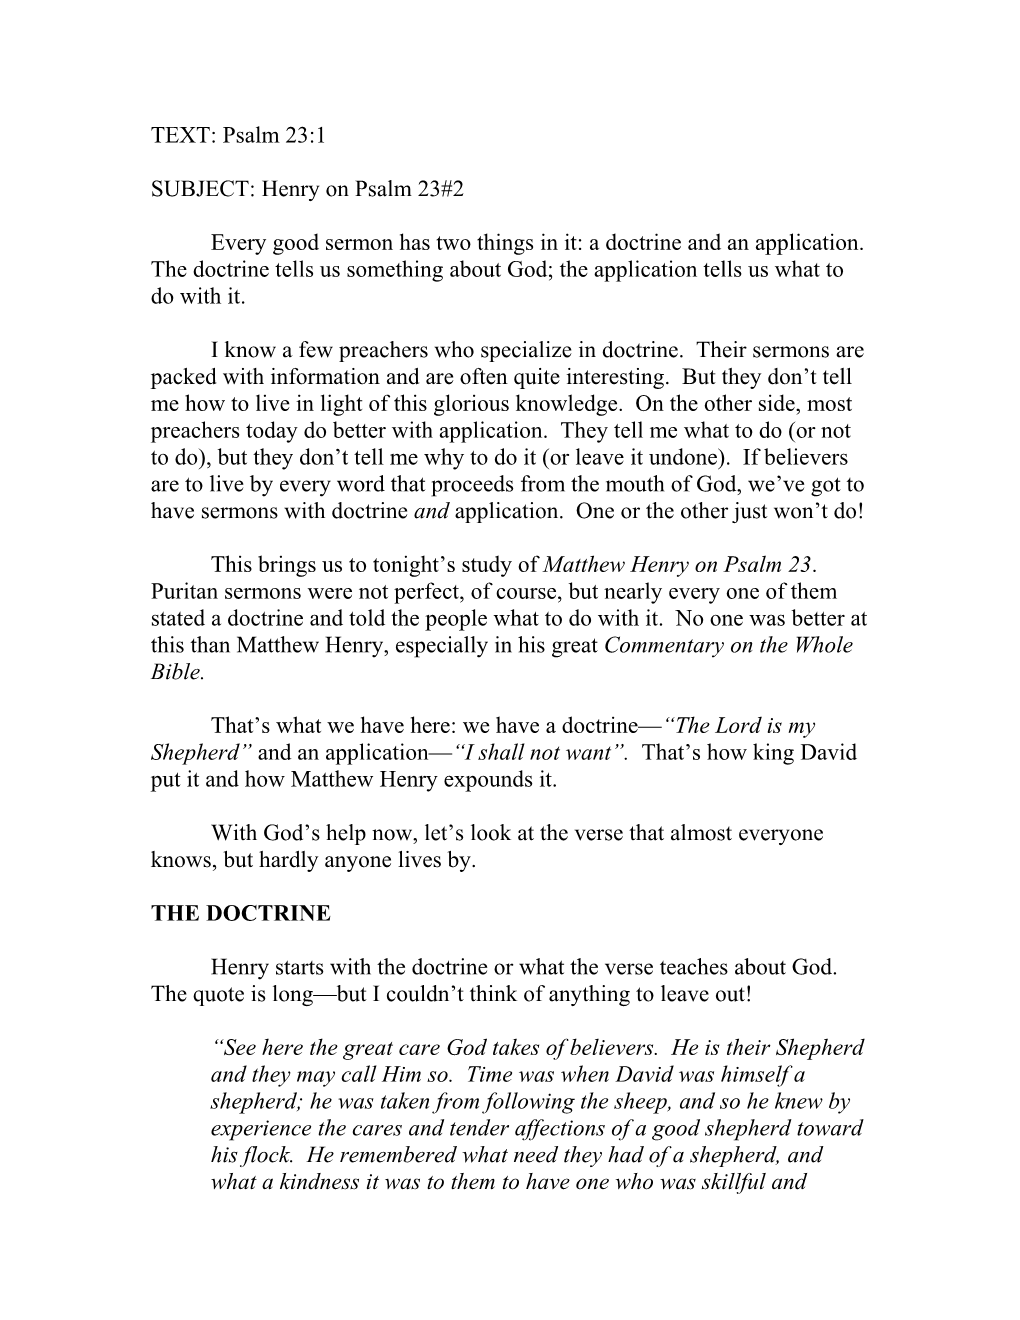 SUBJECT: Henry on Psalm 23#2